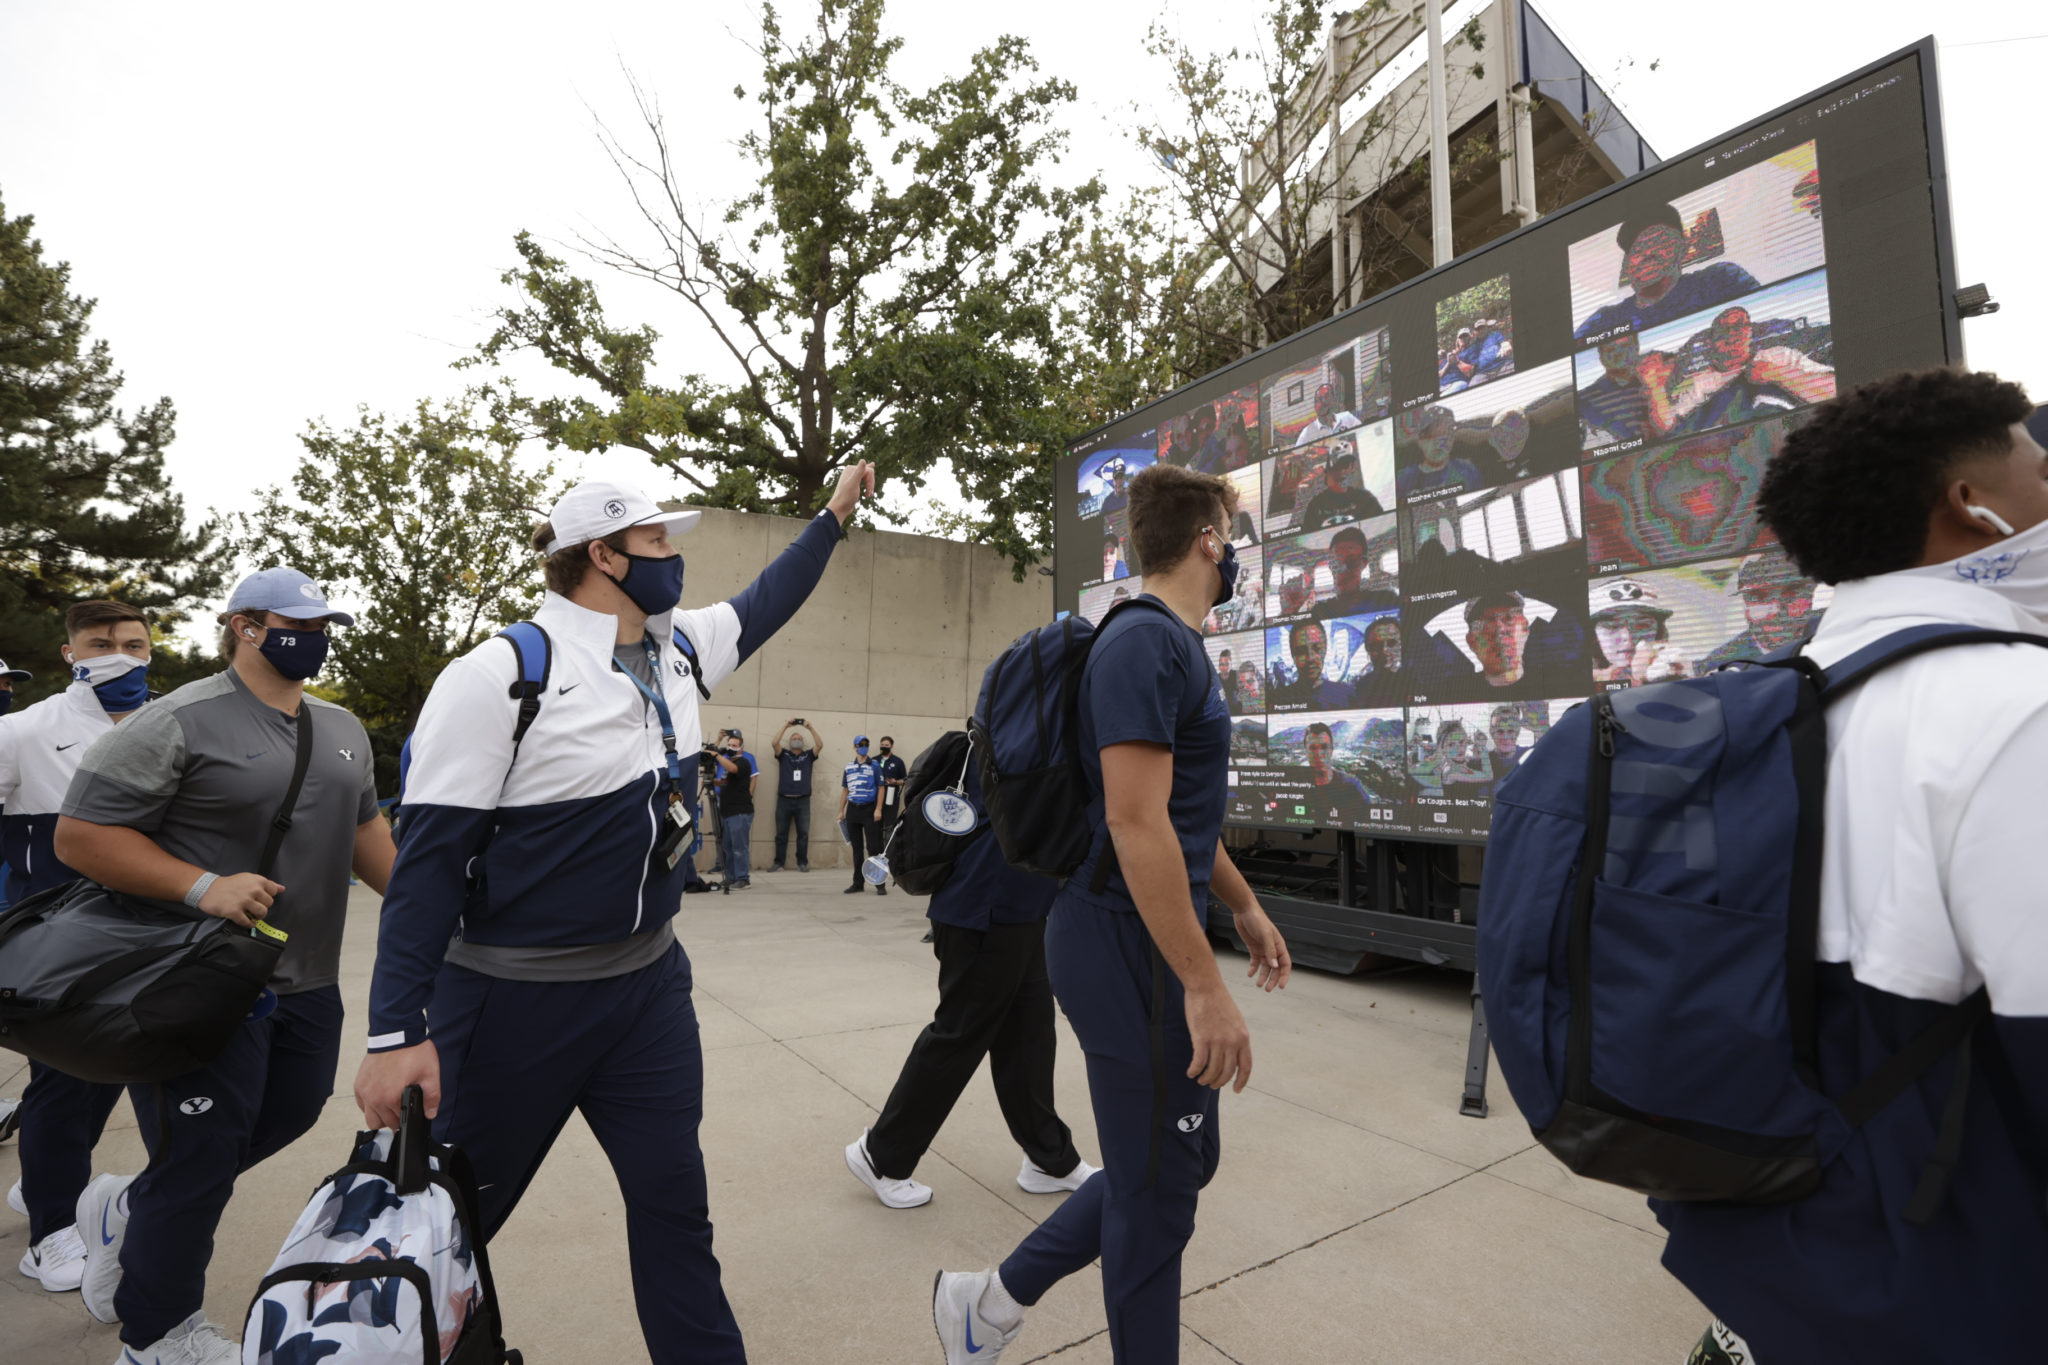 BYU Football creates unique gameday experience for home opener The